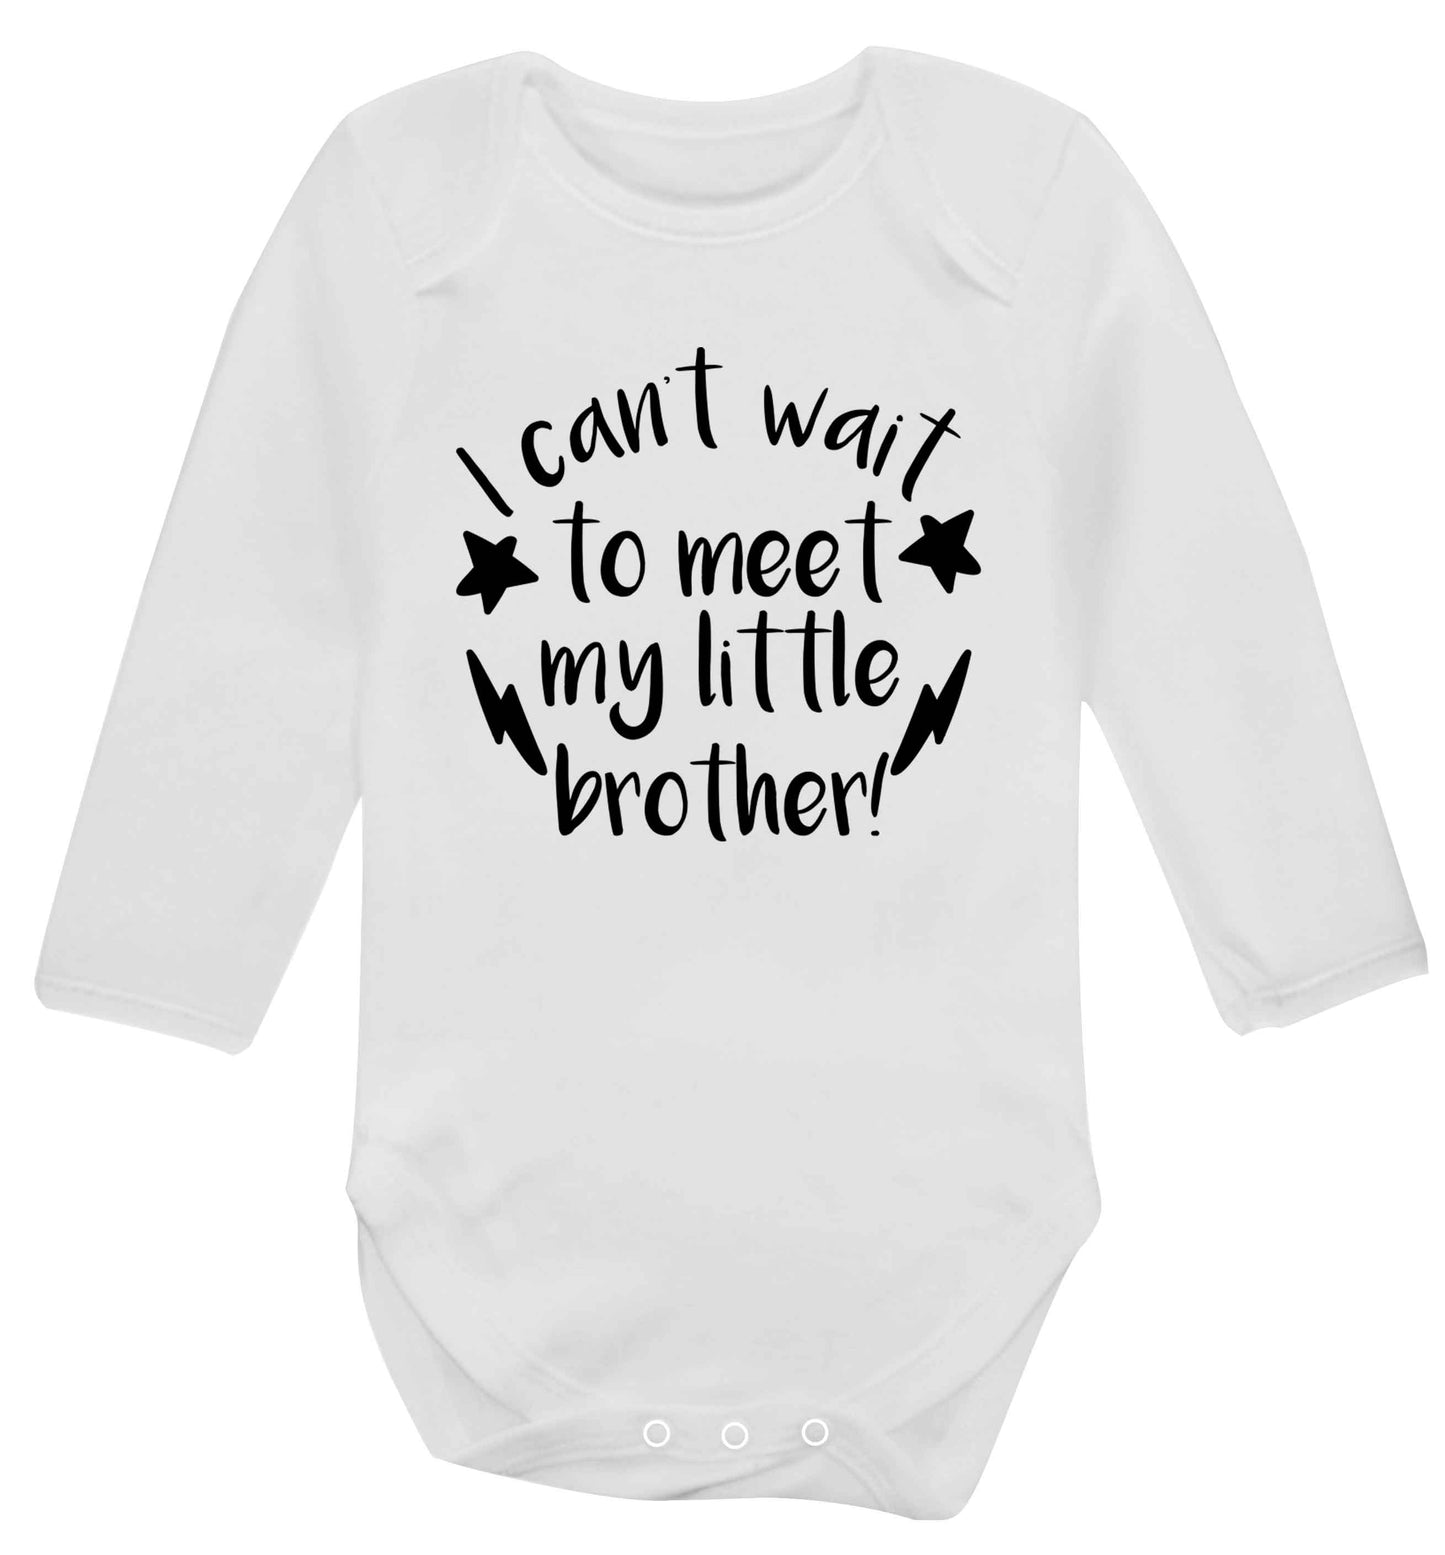 I can't wait to meet my sister! Baby Vest long sleeved white 6-12 months